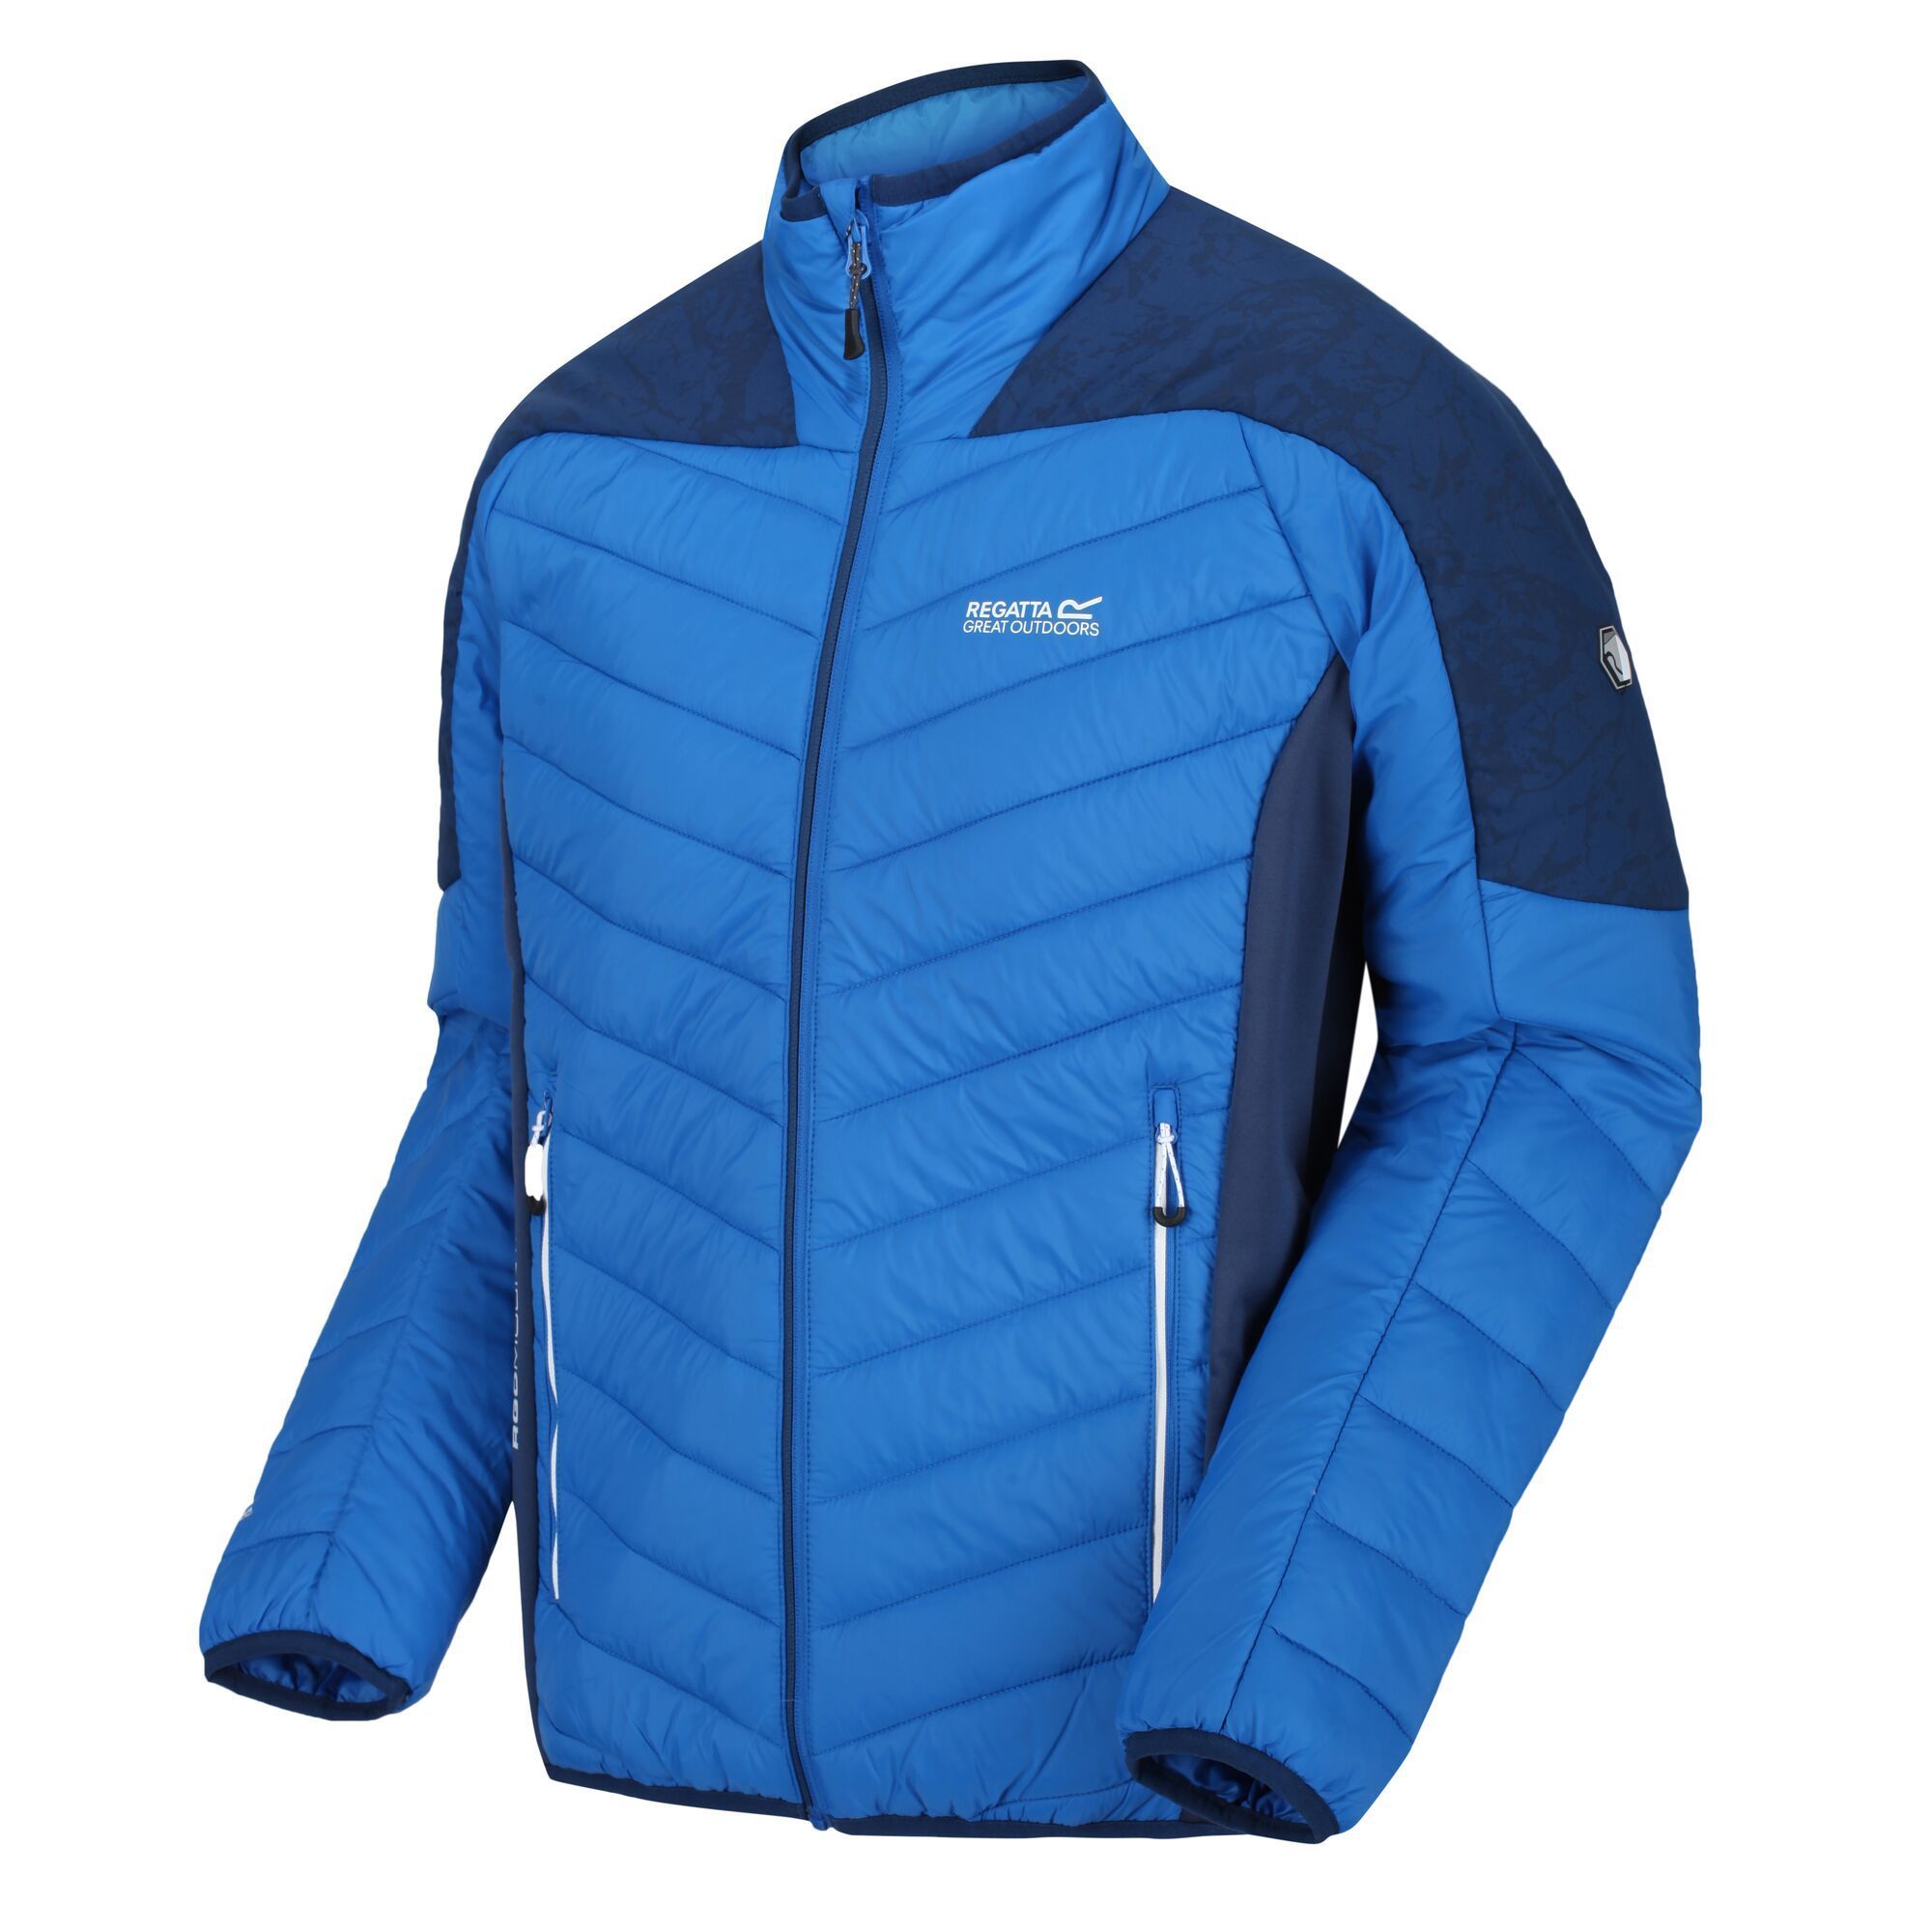 100% lightweight 20d polyamide fabric. Highly reflective printed panels in strategic zones for enhanced visibility. Durable water repellent finish. Lightweight Alpaca wool blend insulation to keep you warm even when wet. 2 zipped lower pockets. Stretch binding to collar and hem.